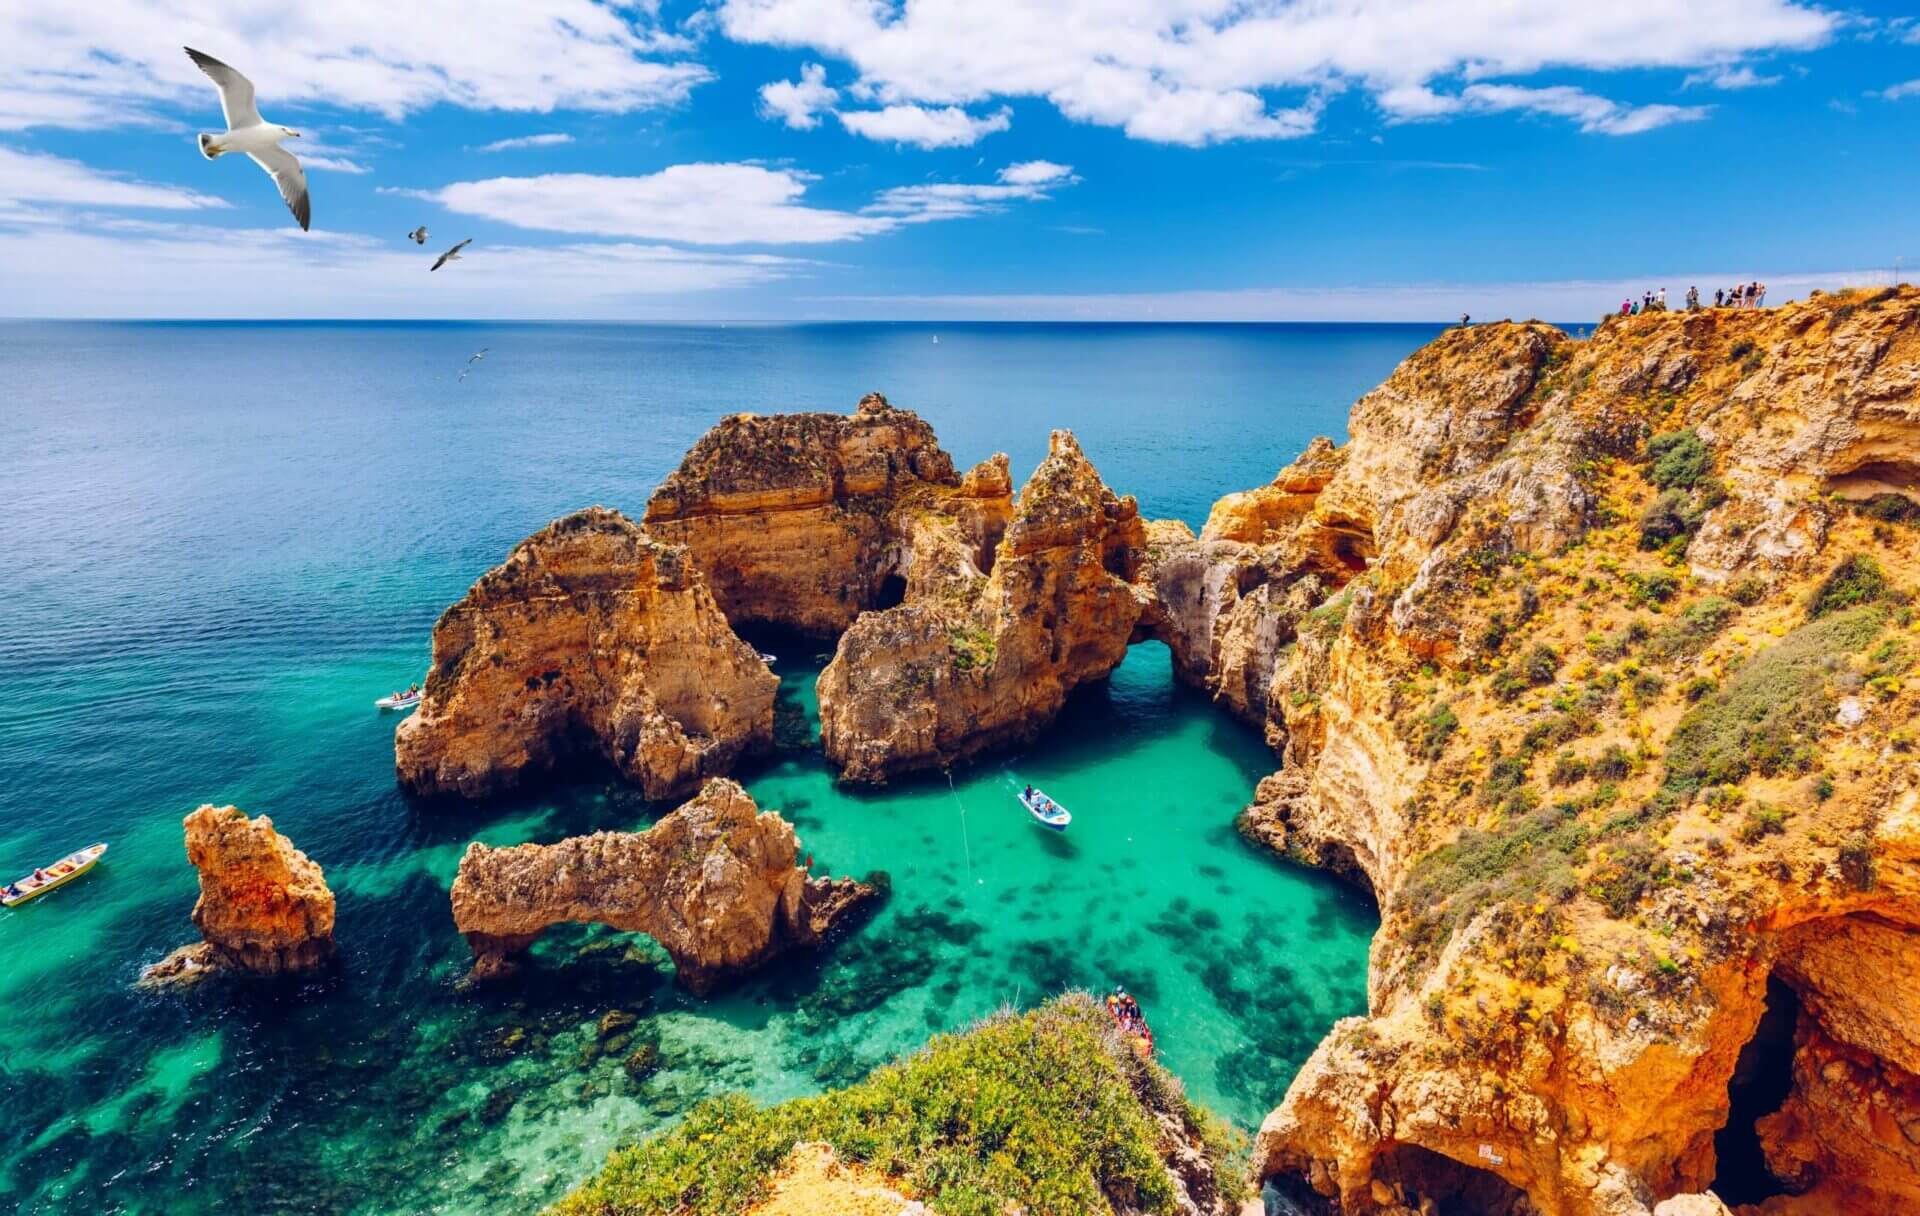 panoramic-view-ponta-da-piedade-with-seagulls-flying-over-rocks-near-lagos-in-algarve-portugal-cliff-rocks-seagulls-and-tourist-boat-on-sea-at-ponta-da-piedade-algarve-region-portugal-stockpack-istock